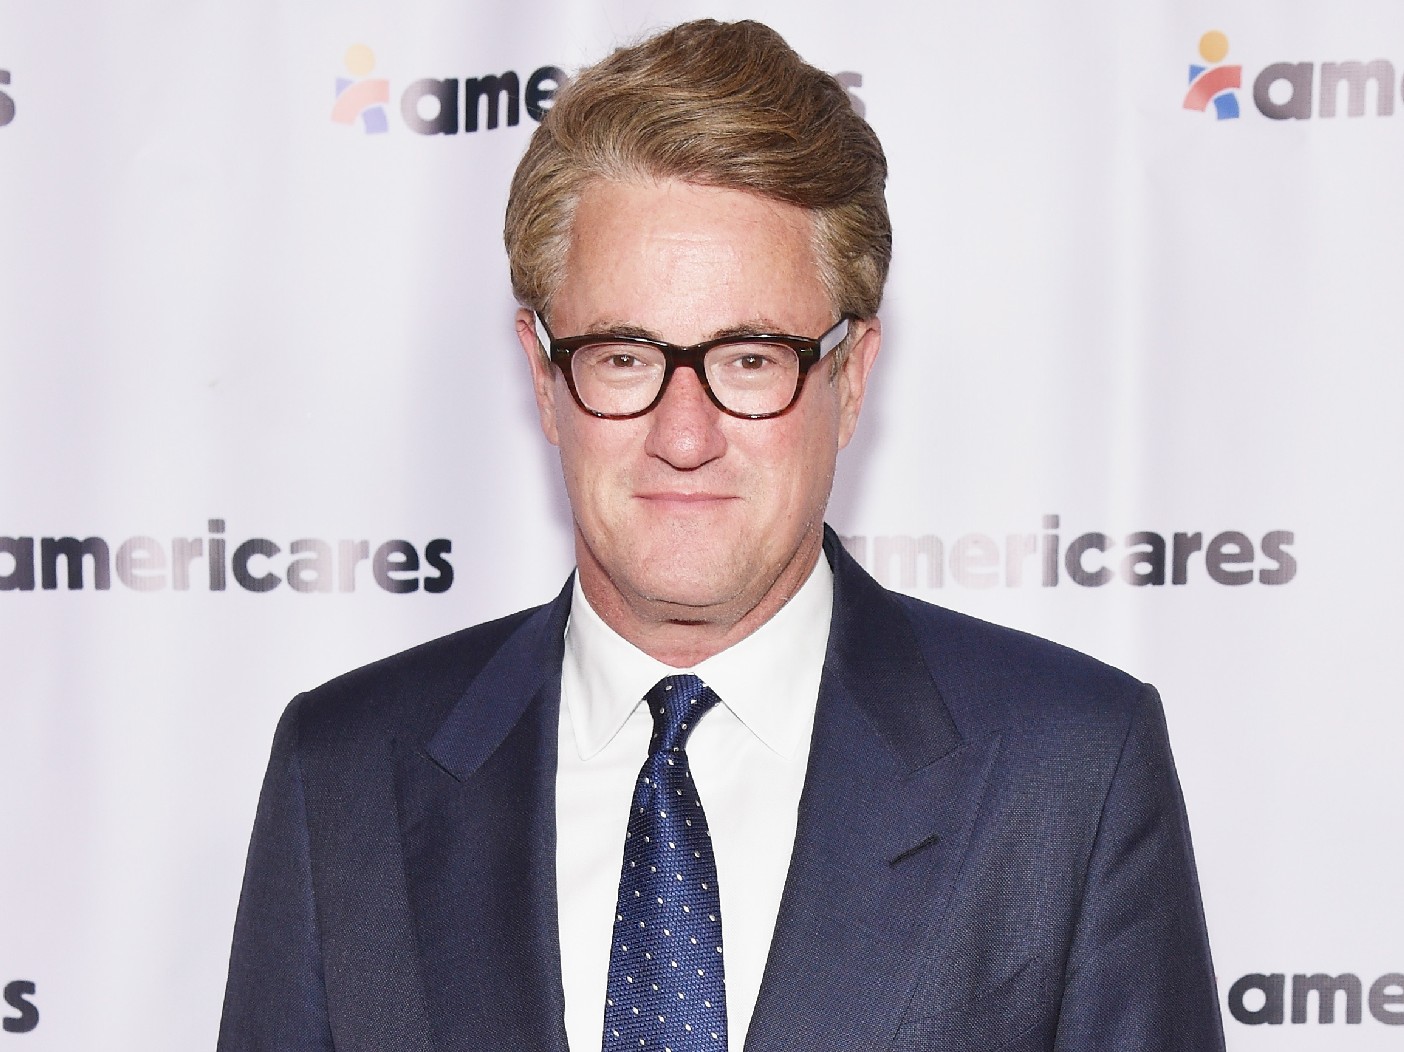 CNN Allegedly Looking To Poach Joe Scarborough, CBS Hosts; Threatening To Replace Current Anchors, Network Gossip Claims